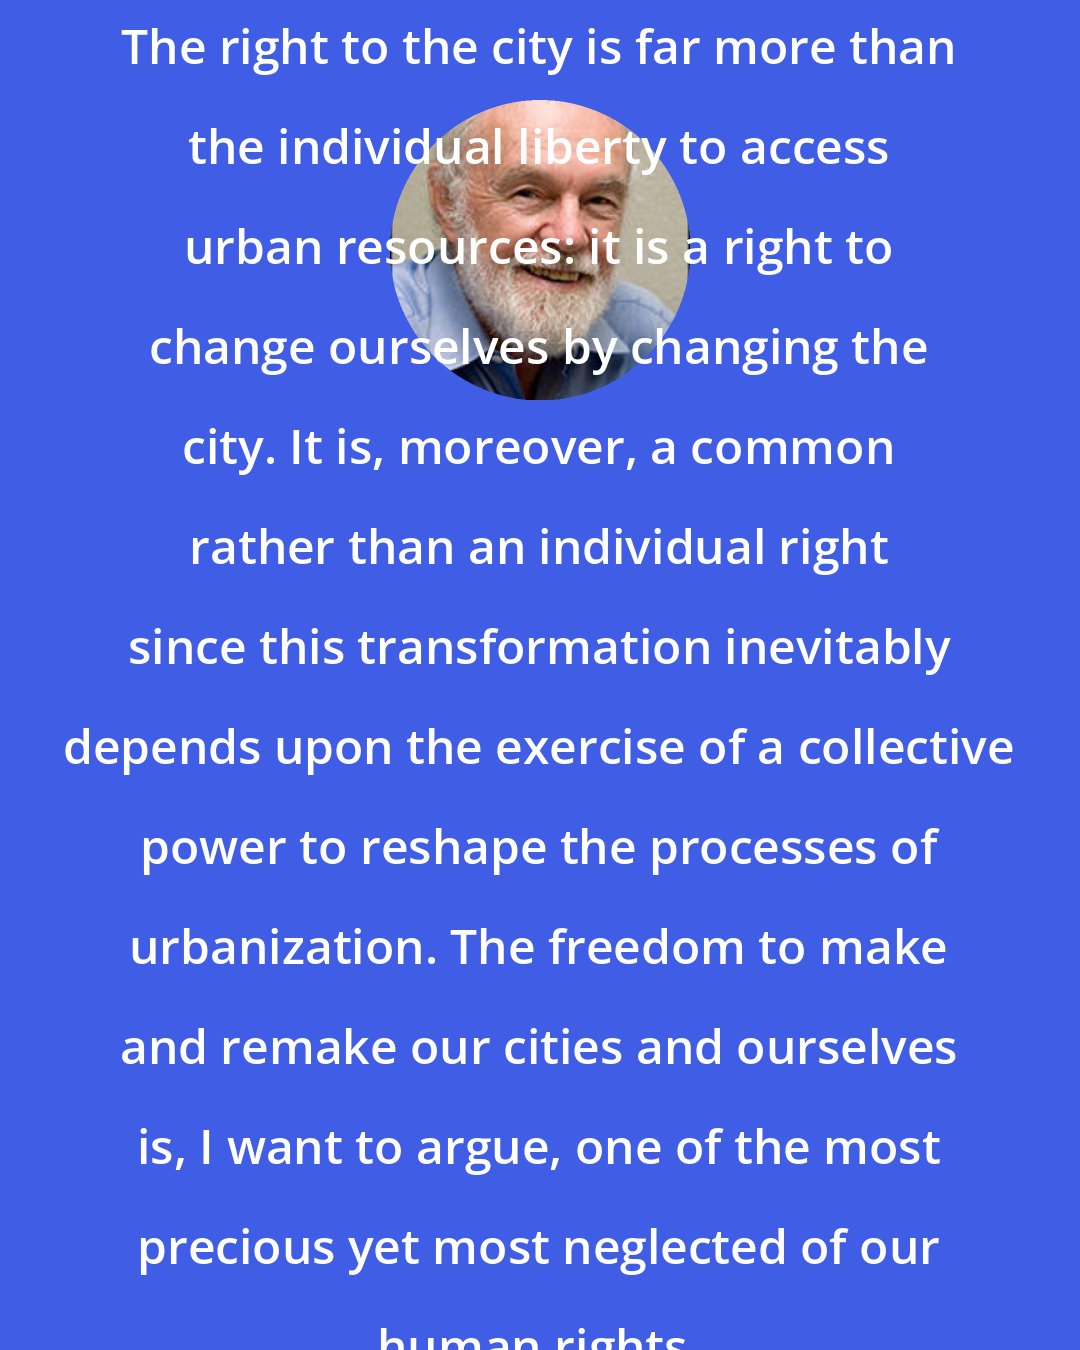 David Harvey: The right to the city is far more than the individual liberty to access urban resources: it is a right to change ourselves by changing the city. It is, moreover, a common rather than an individual right since this transformation inevitably depends upon the exercise of a collective power to reshape the processes of urbanization. The freedom to make and remake our cities and ourselves is, I want to argue, one of the most precious yet most neglected of our human rights.